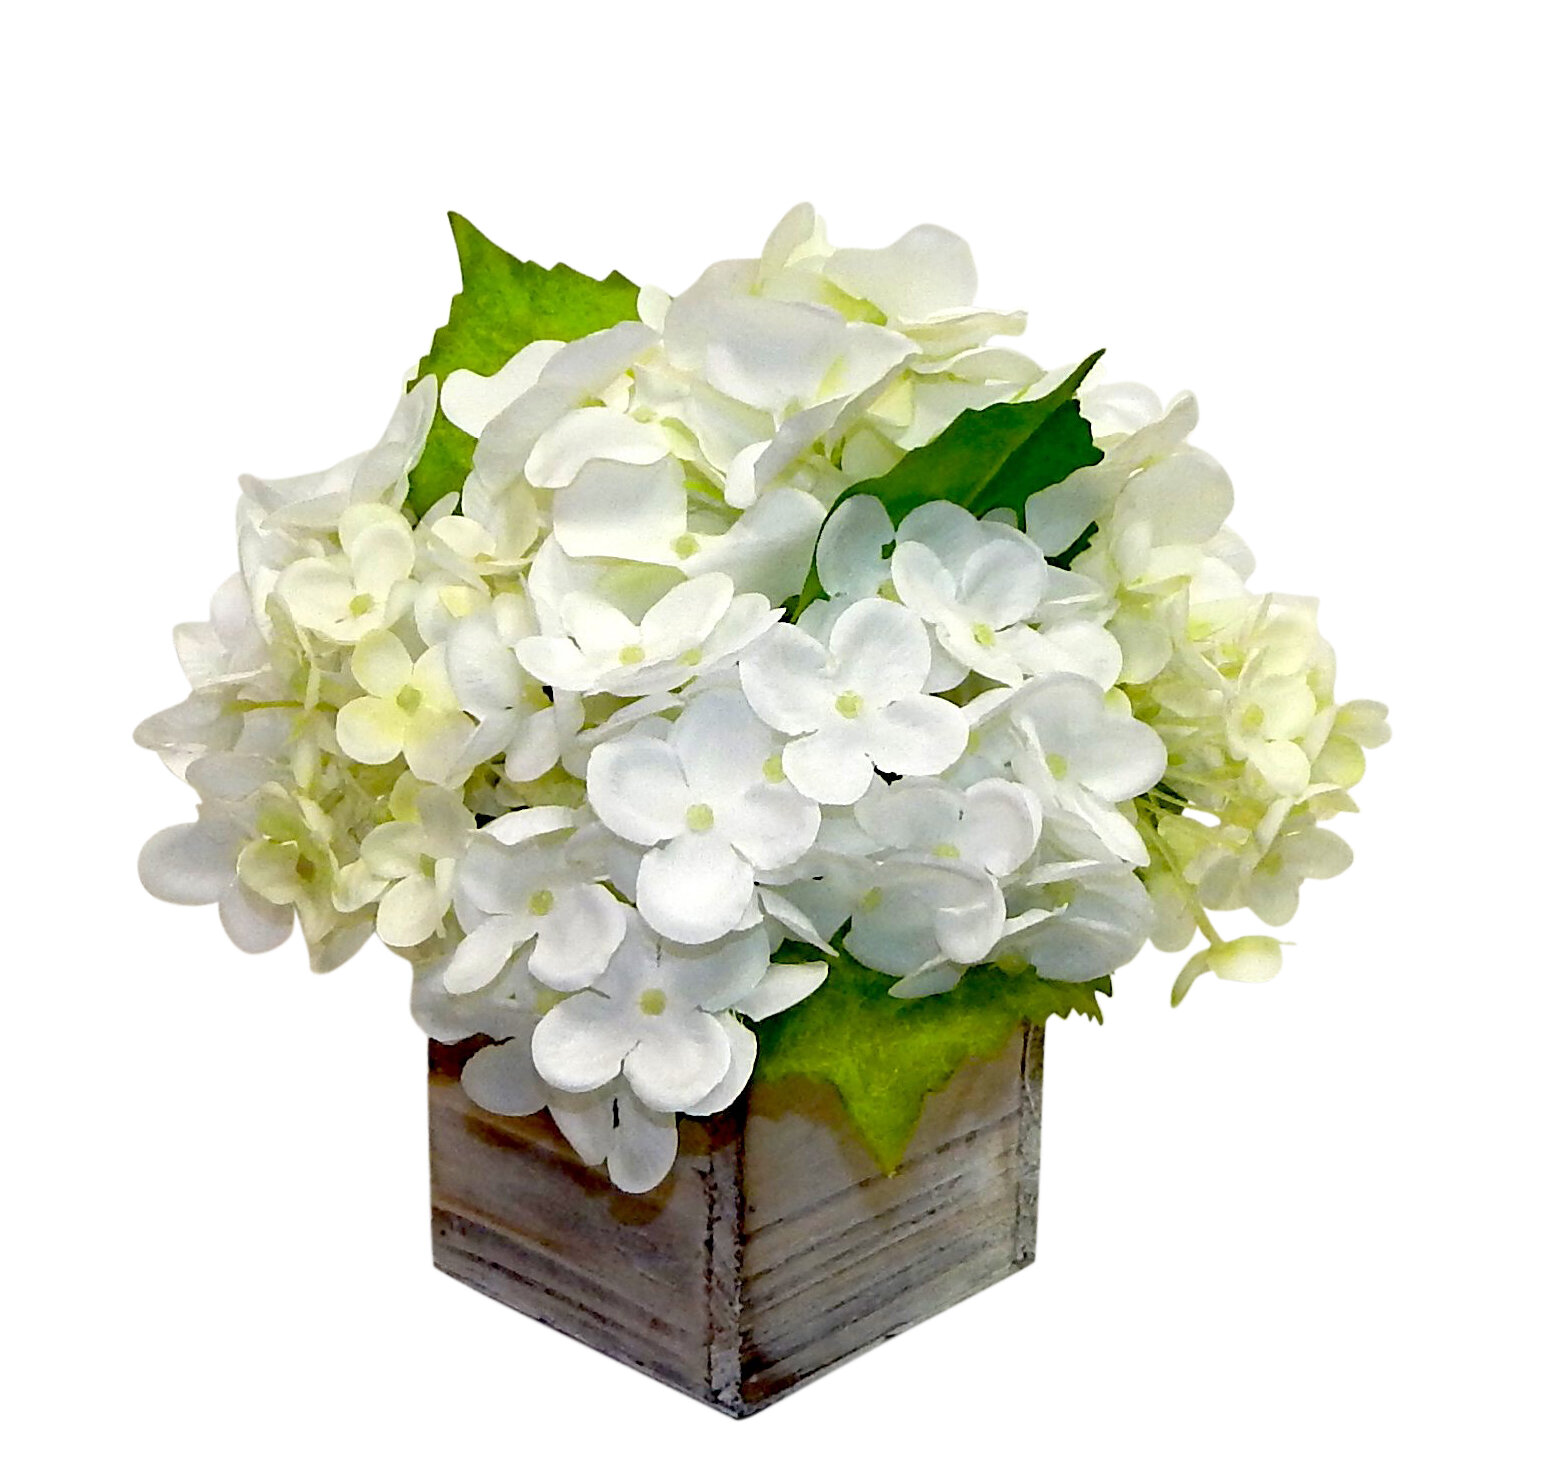 artificial flower arrangements for the home